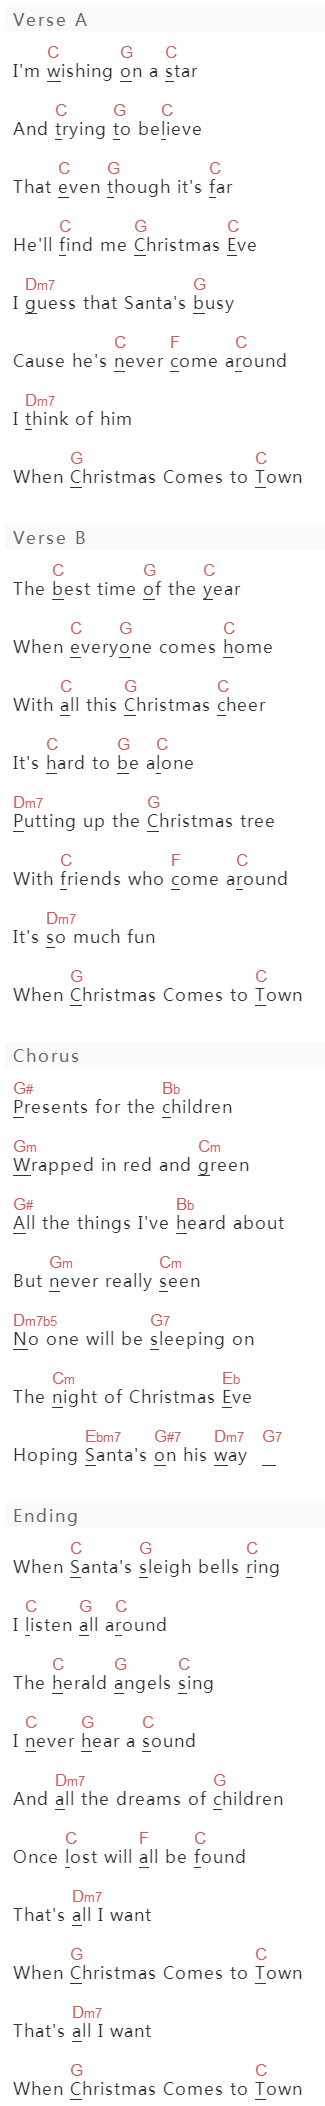 Matthew Hall , Meagan Moore《When Christmas Comes To Town》吉他谱C调和弦谱(txt)1